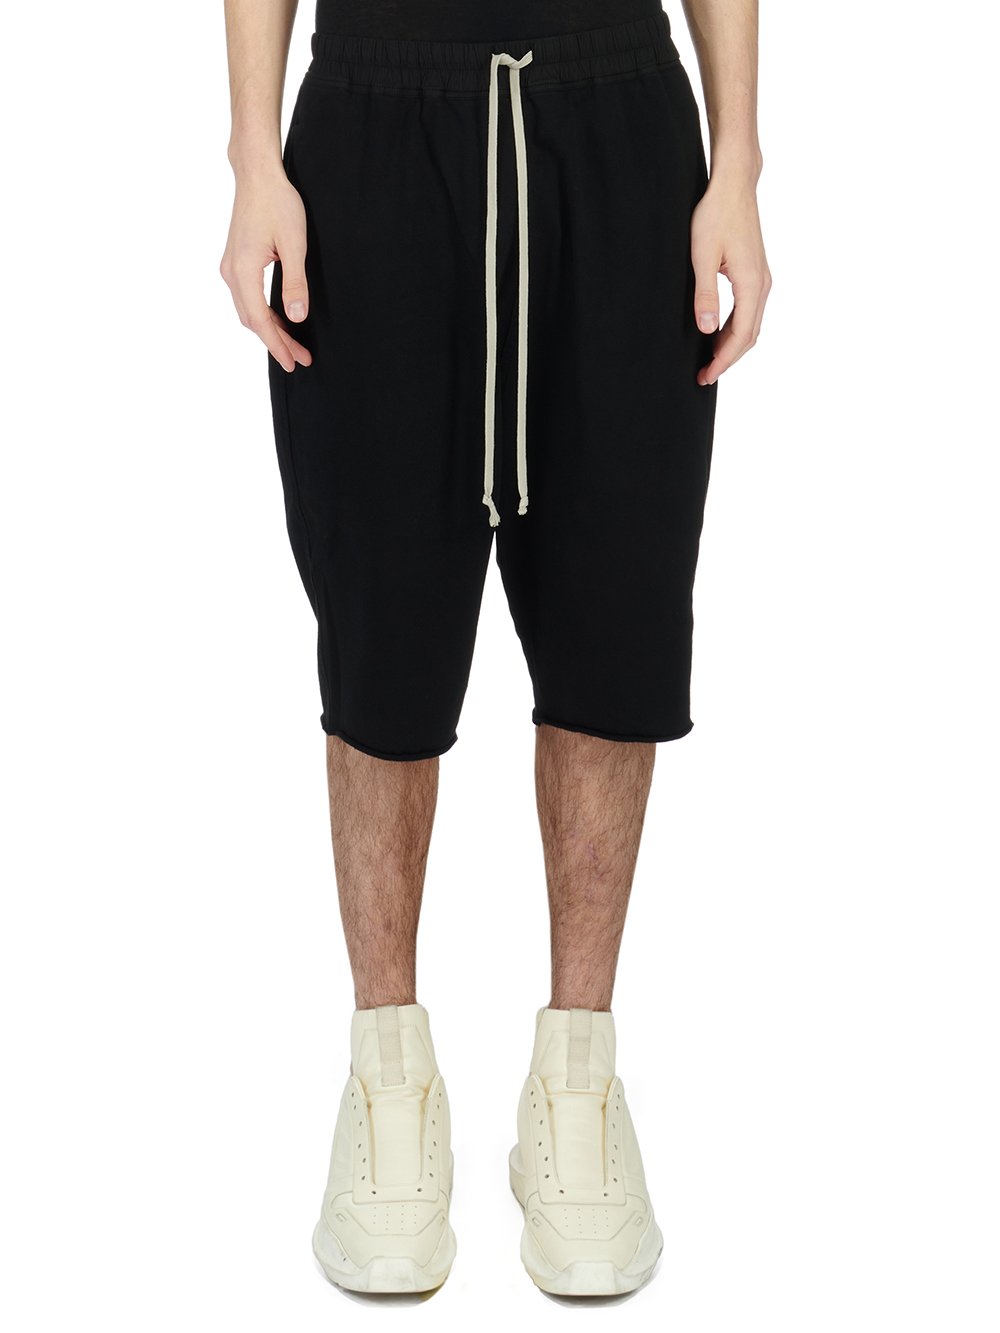 RICK OWENS FW23 LUXOR DRK SHORTS IN BLACK COMPACT HEAVY COTTON JERSEY